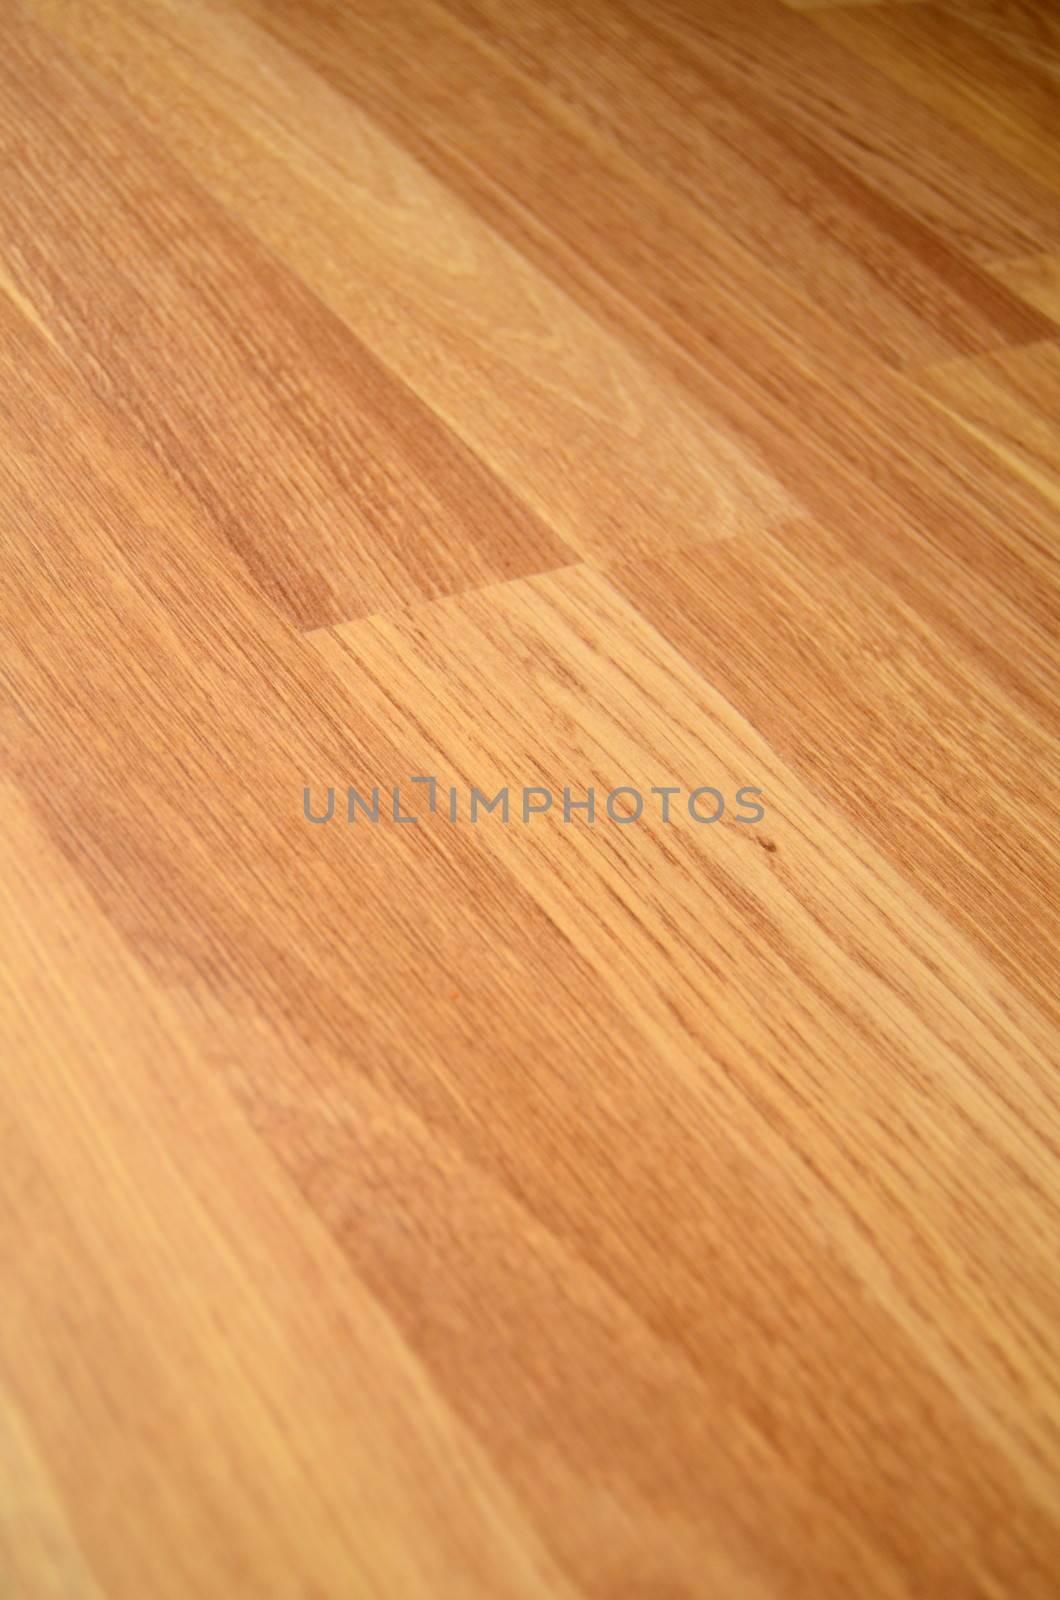 Background Texture of Laminate Wooden Floor With Shallow Depth Of Focus